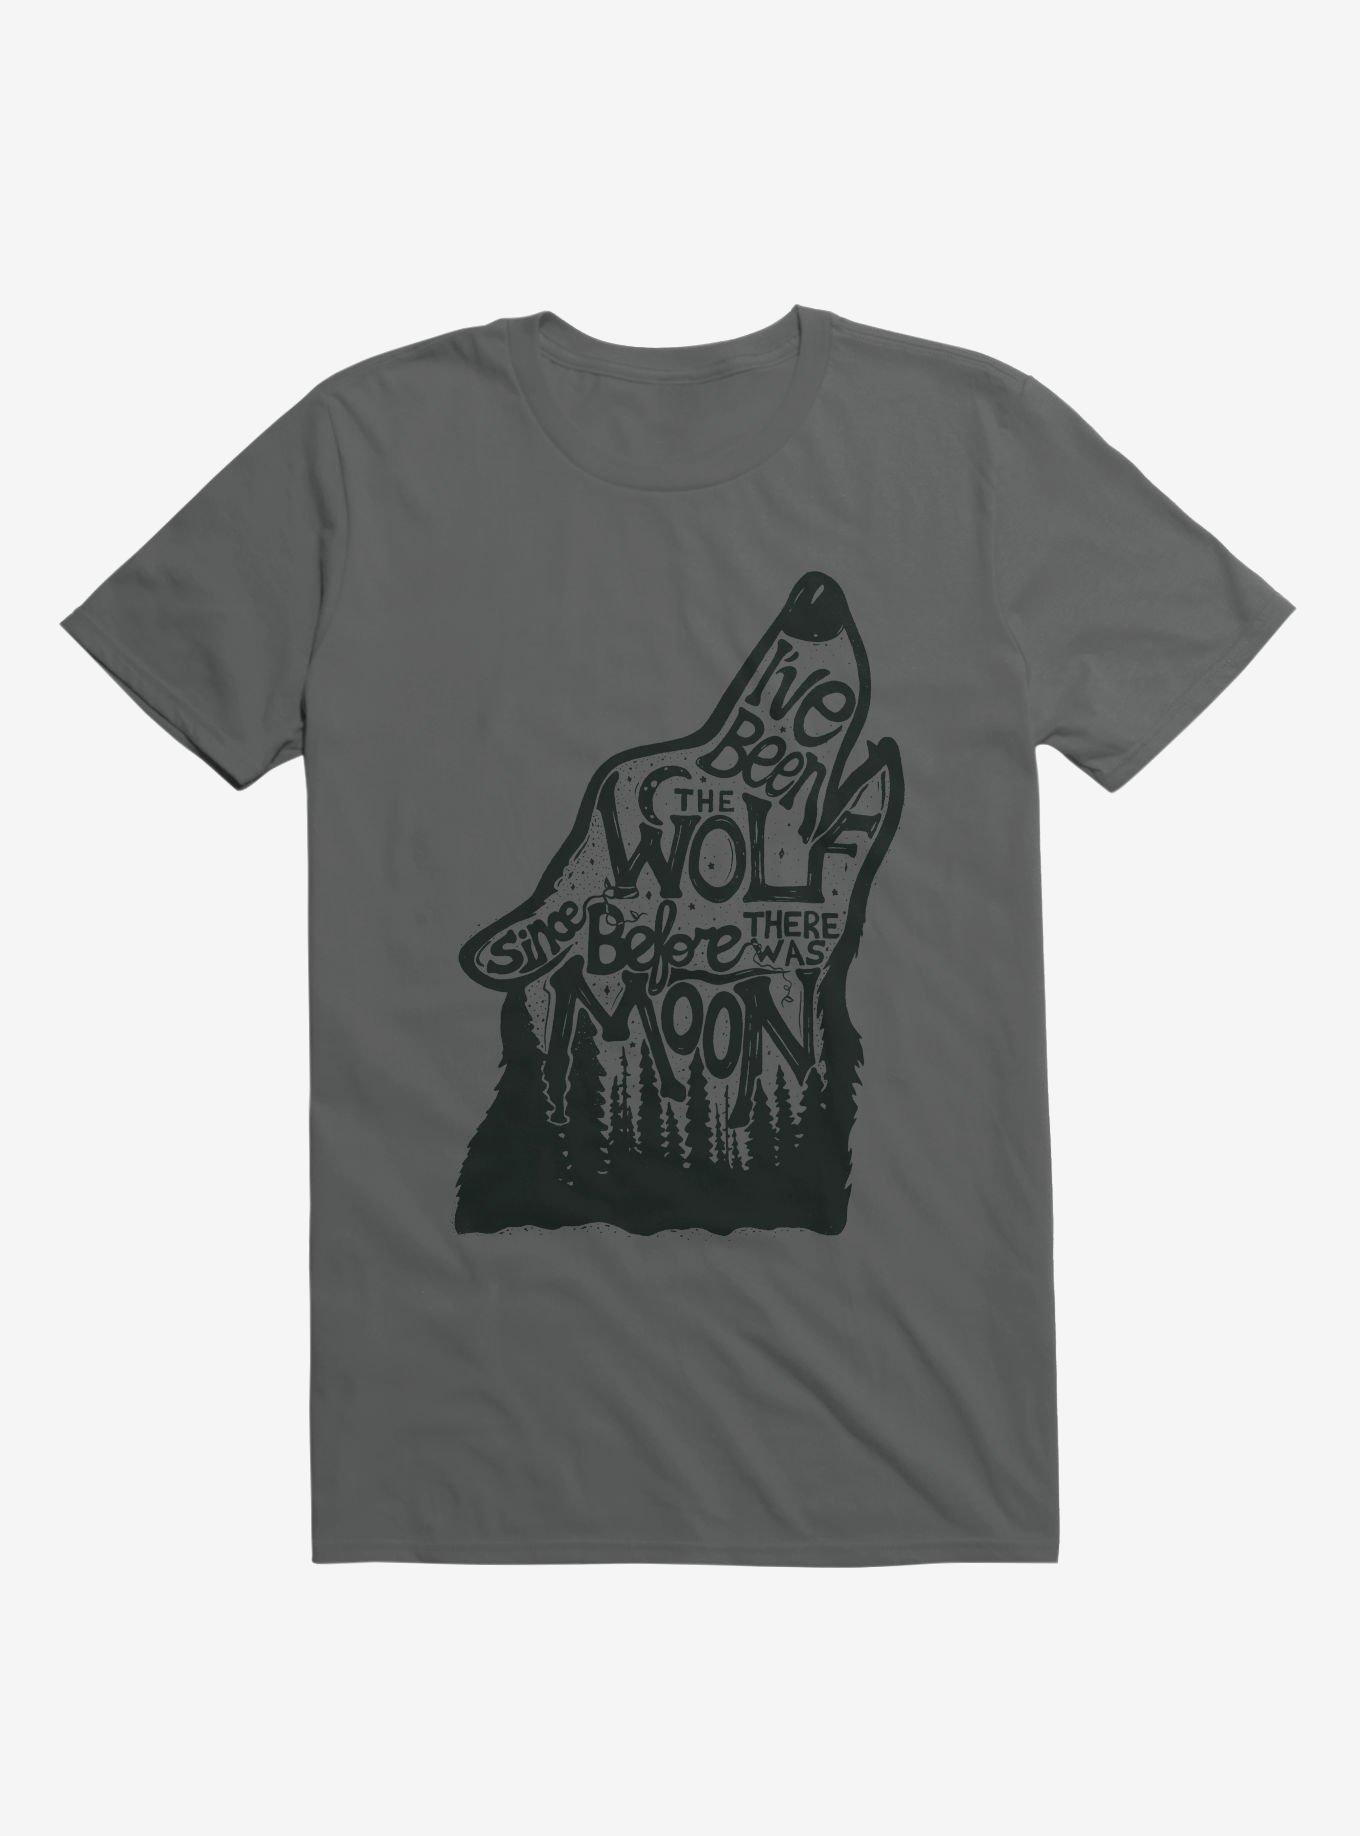 I've Been The Wolf Since Before There Was A Moon T-Shirt